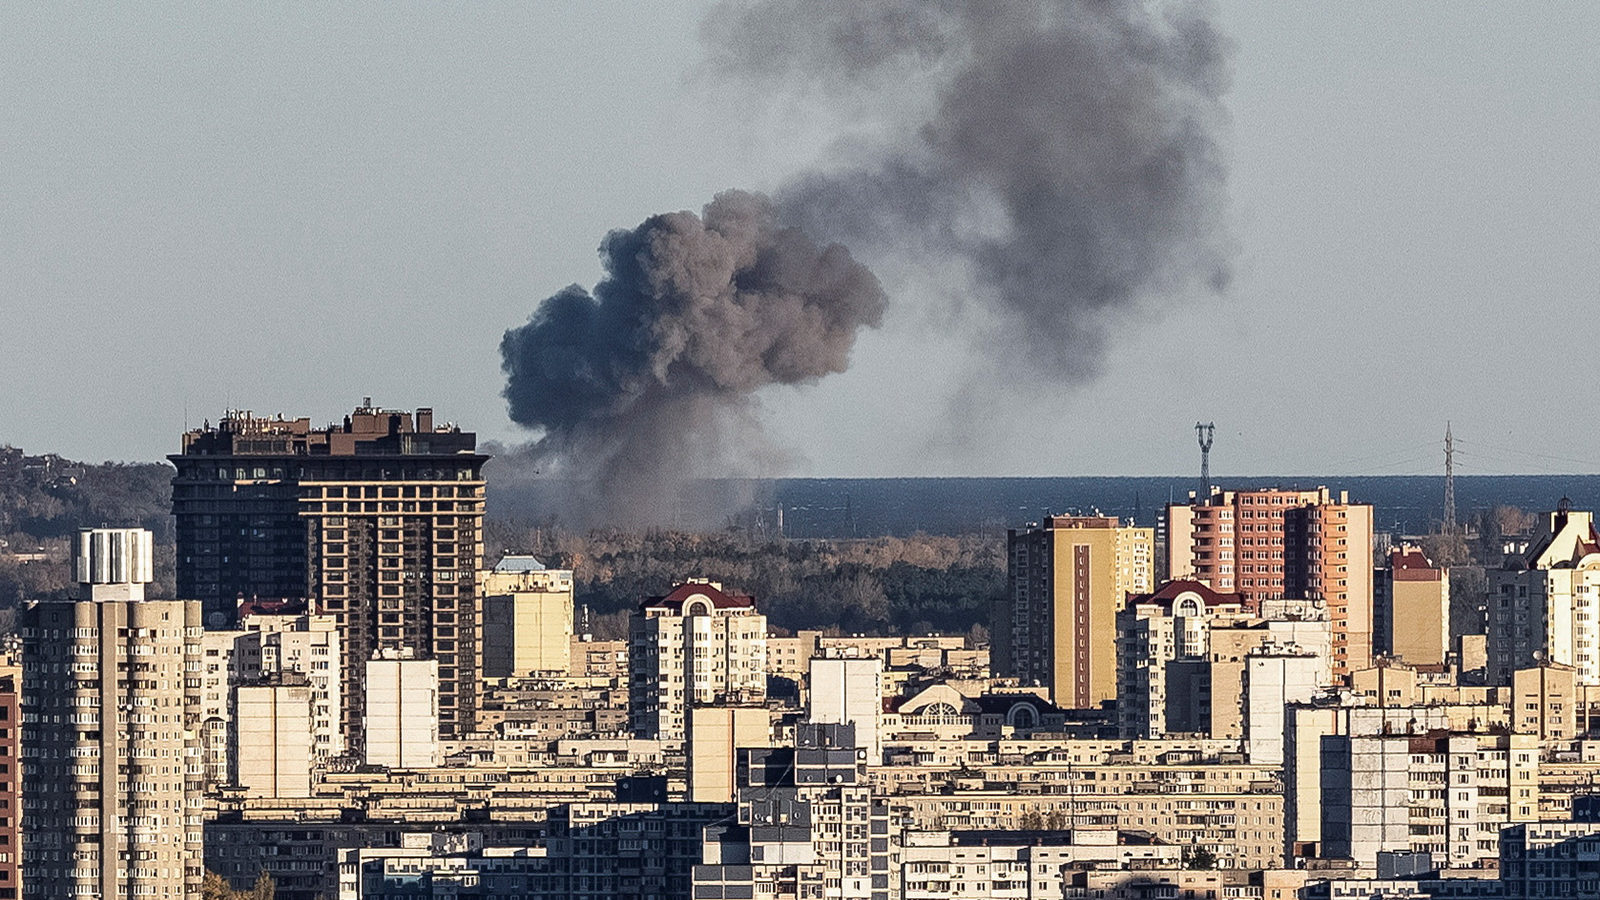 Smoke rises on the outskirts of Kyiv during a Russian missile attack on Oct. 31. Photo credit: Gleb...